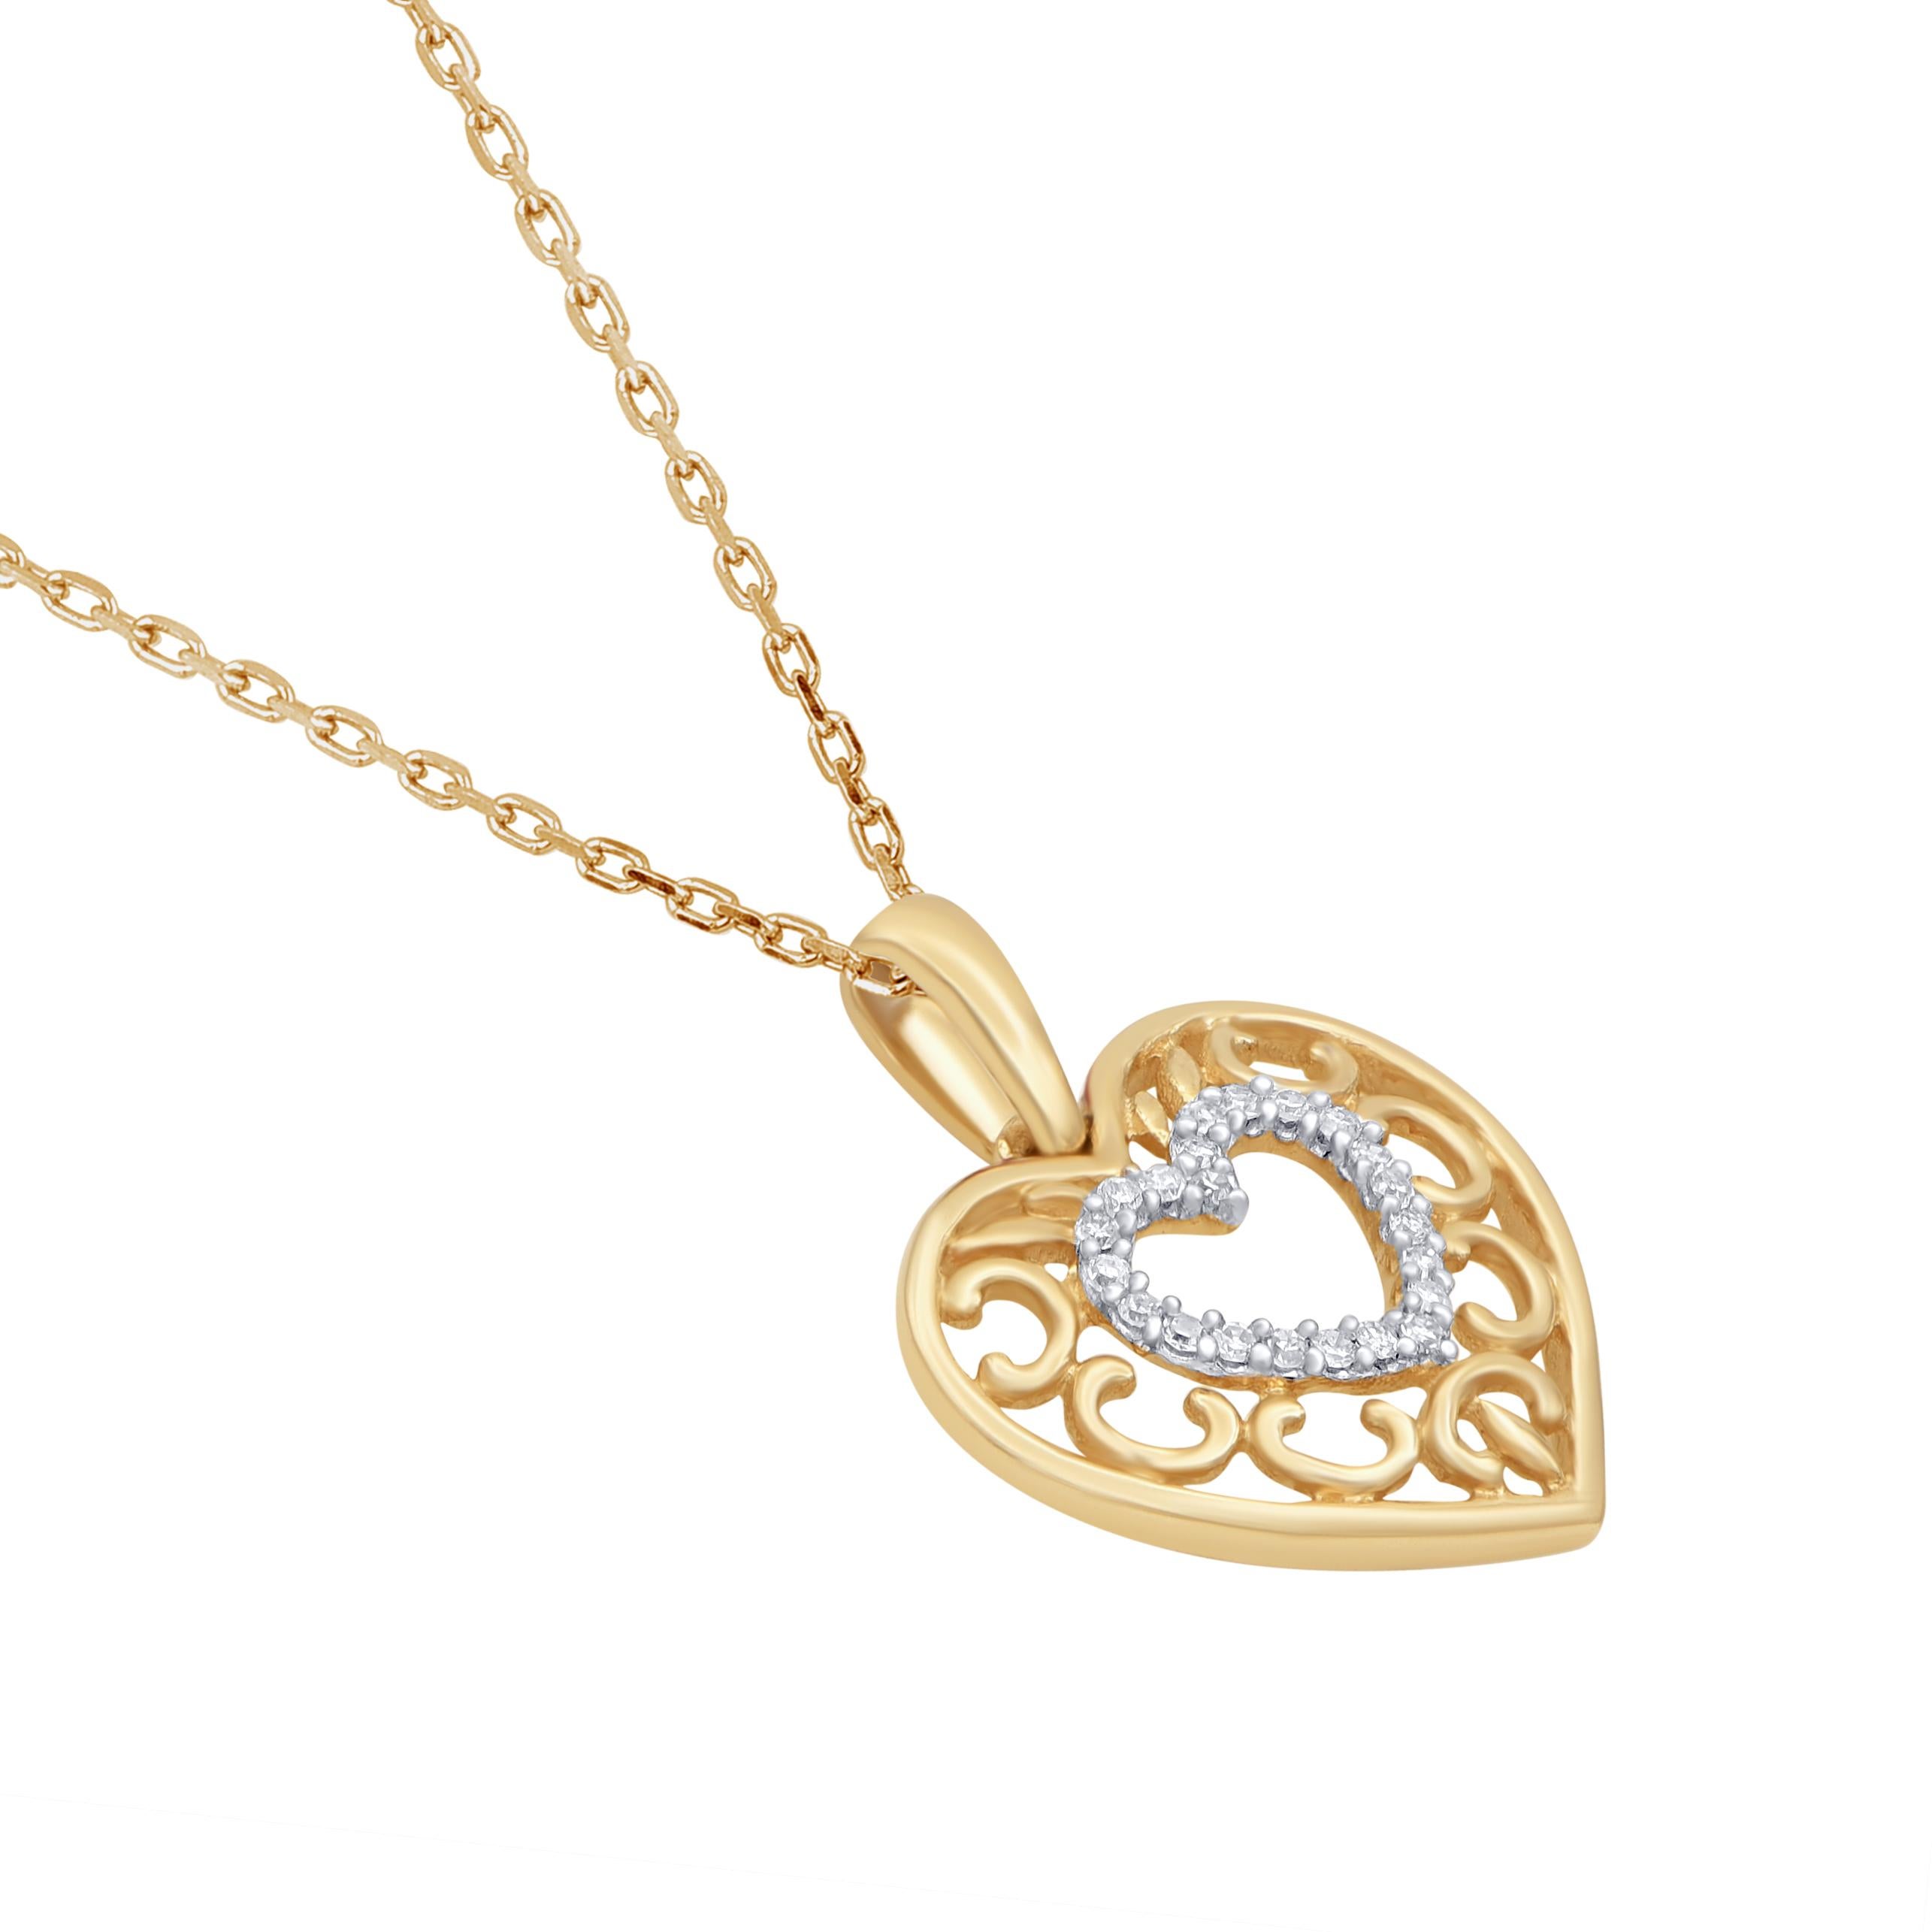 Experience dazzling diamonds with this magnificent studded pendant that’s sure to steal all the attention. The heart shaped pendant is crafted from 14 karat yellow gold and features round single cut 22 white diamonds set in prong setting. H-I color